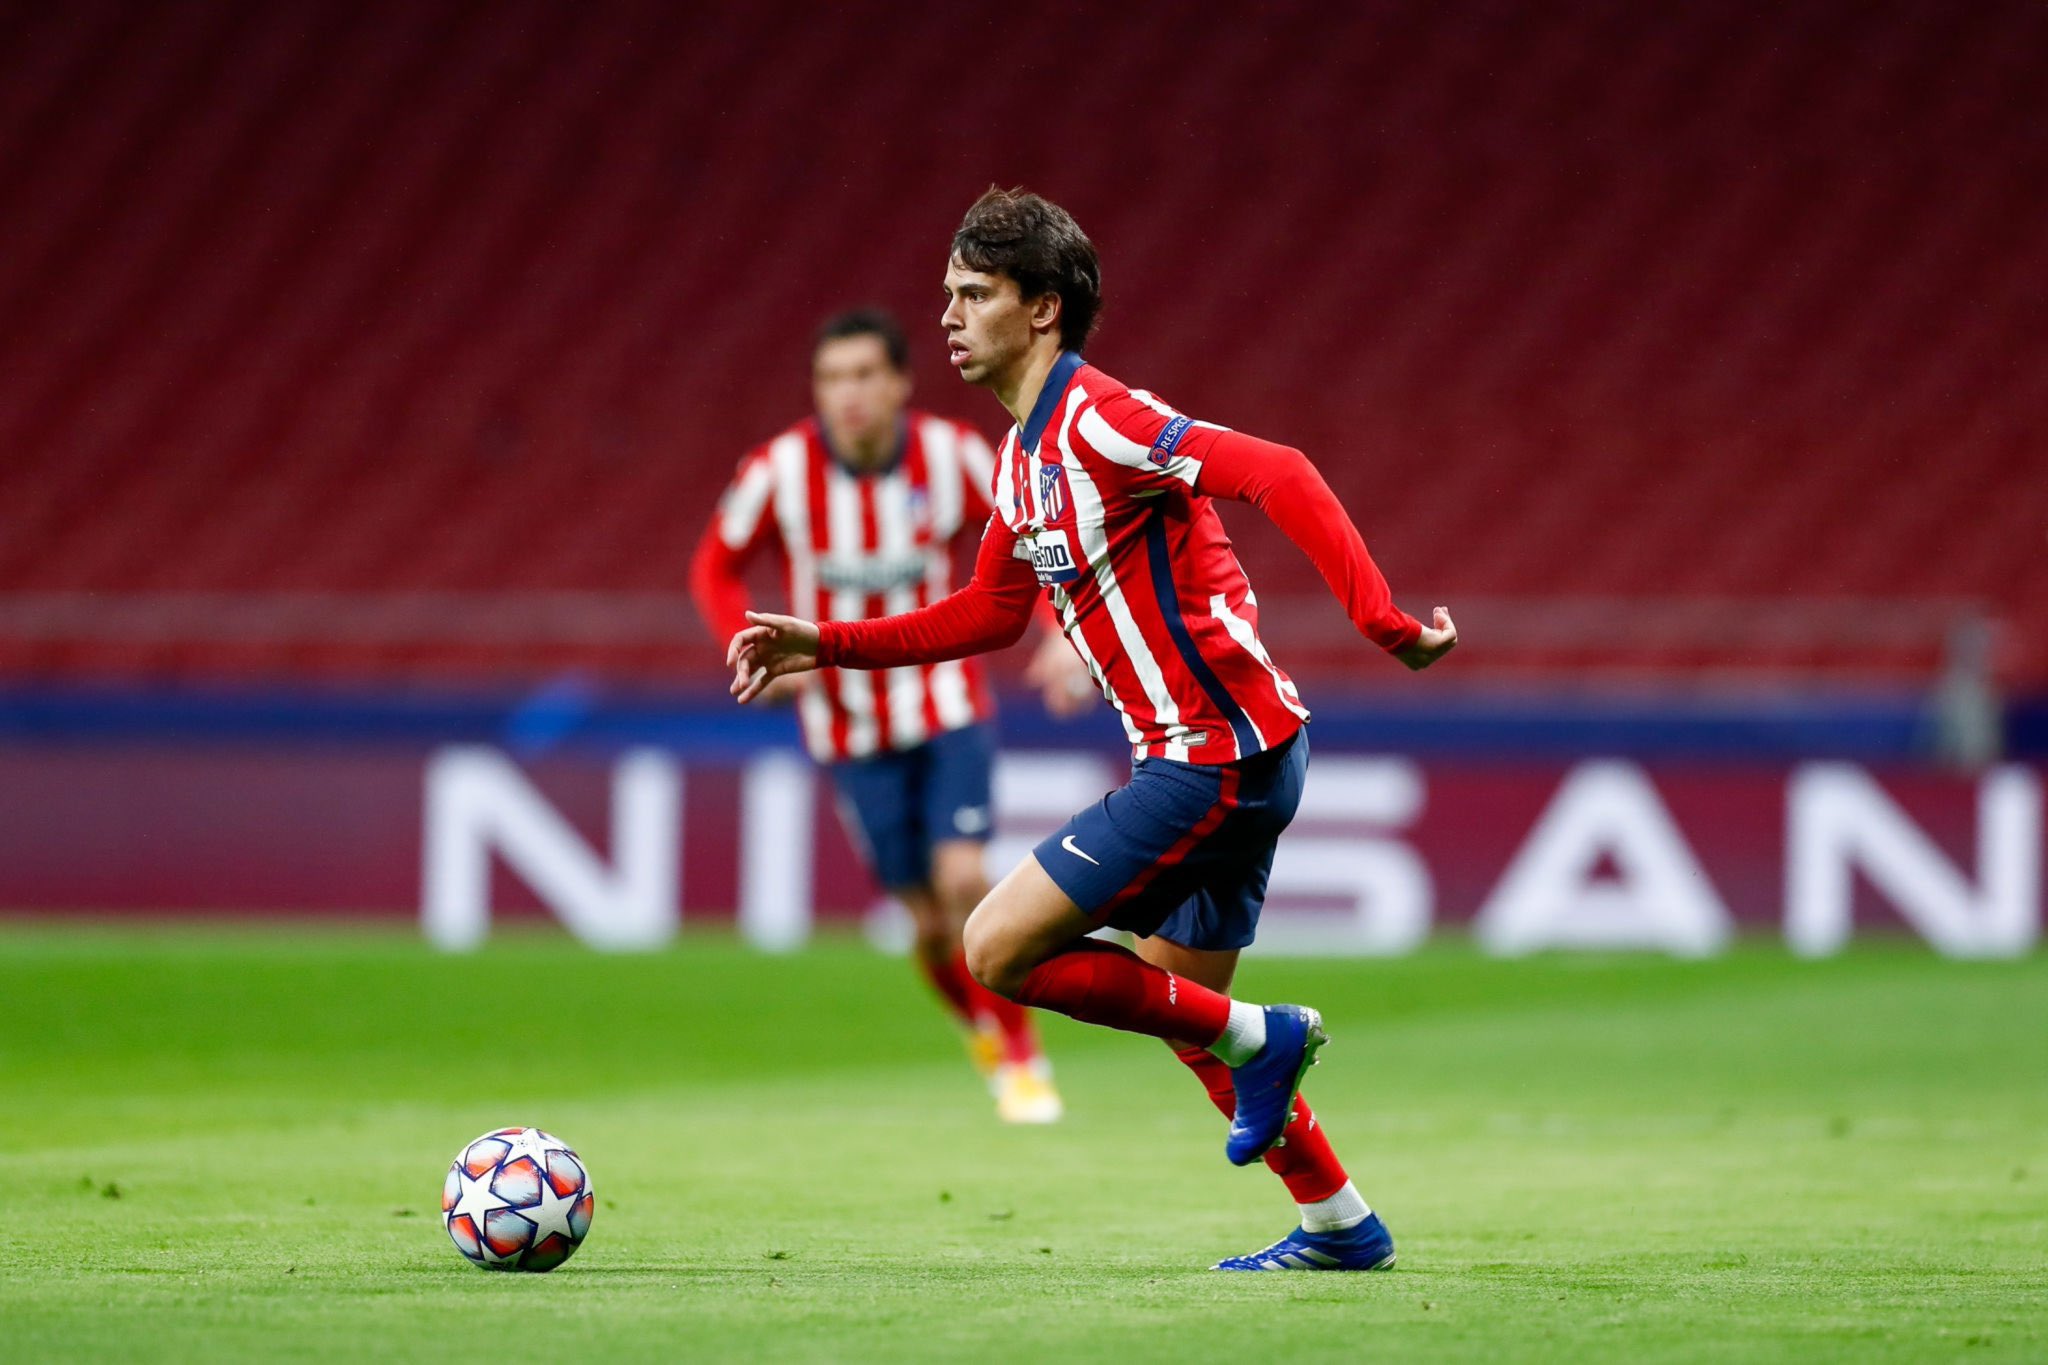 Atletico Madrid star Joao Felix tests positive for Covid-19